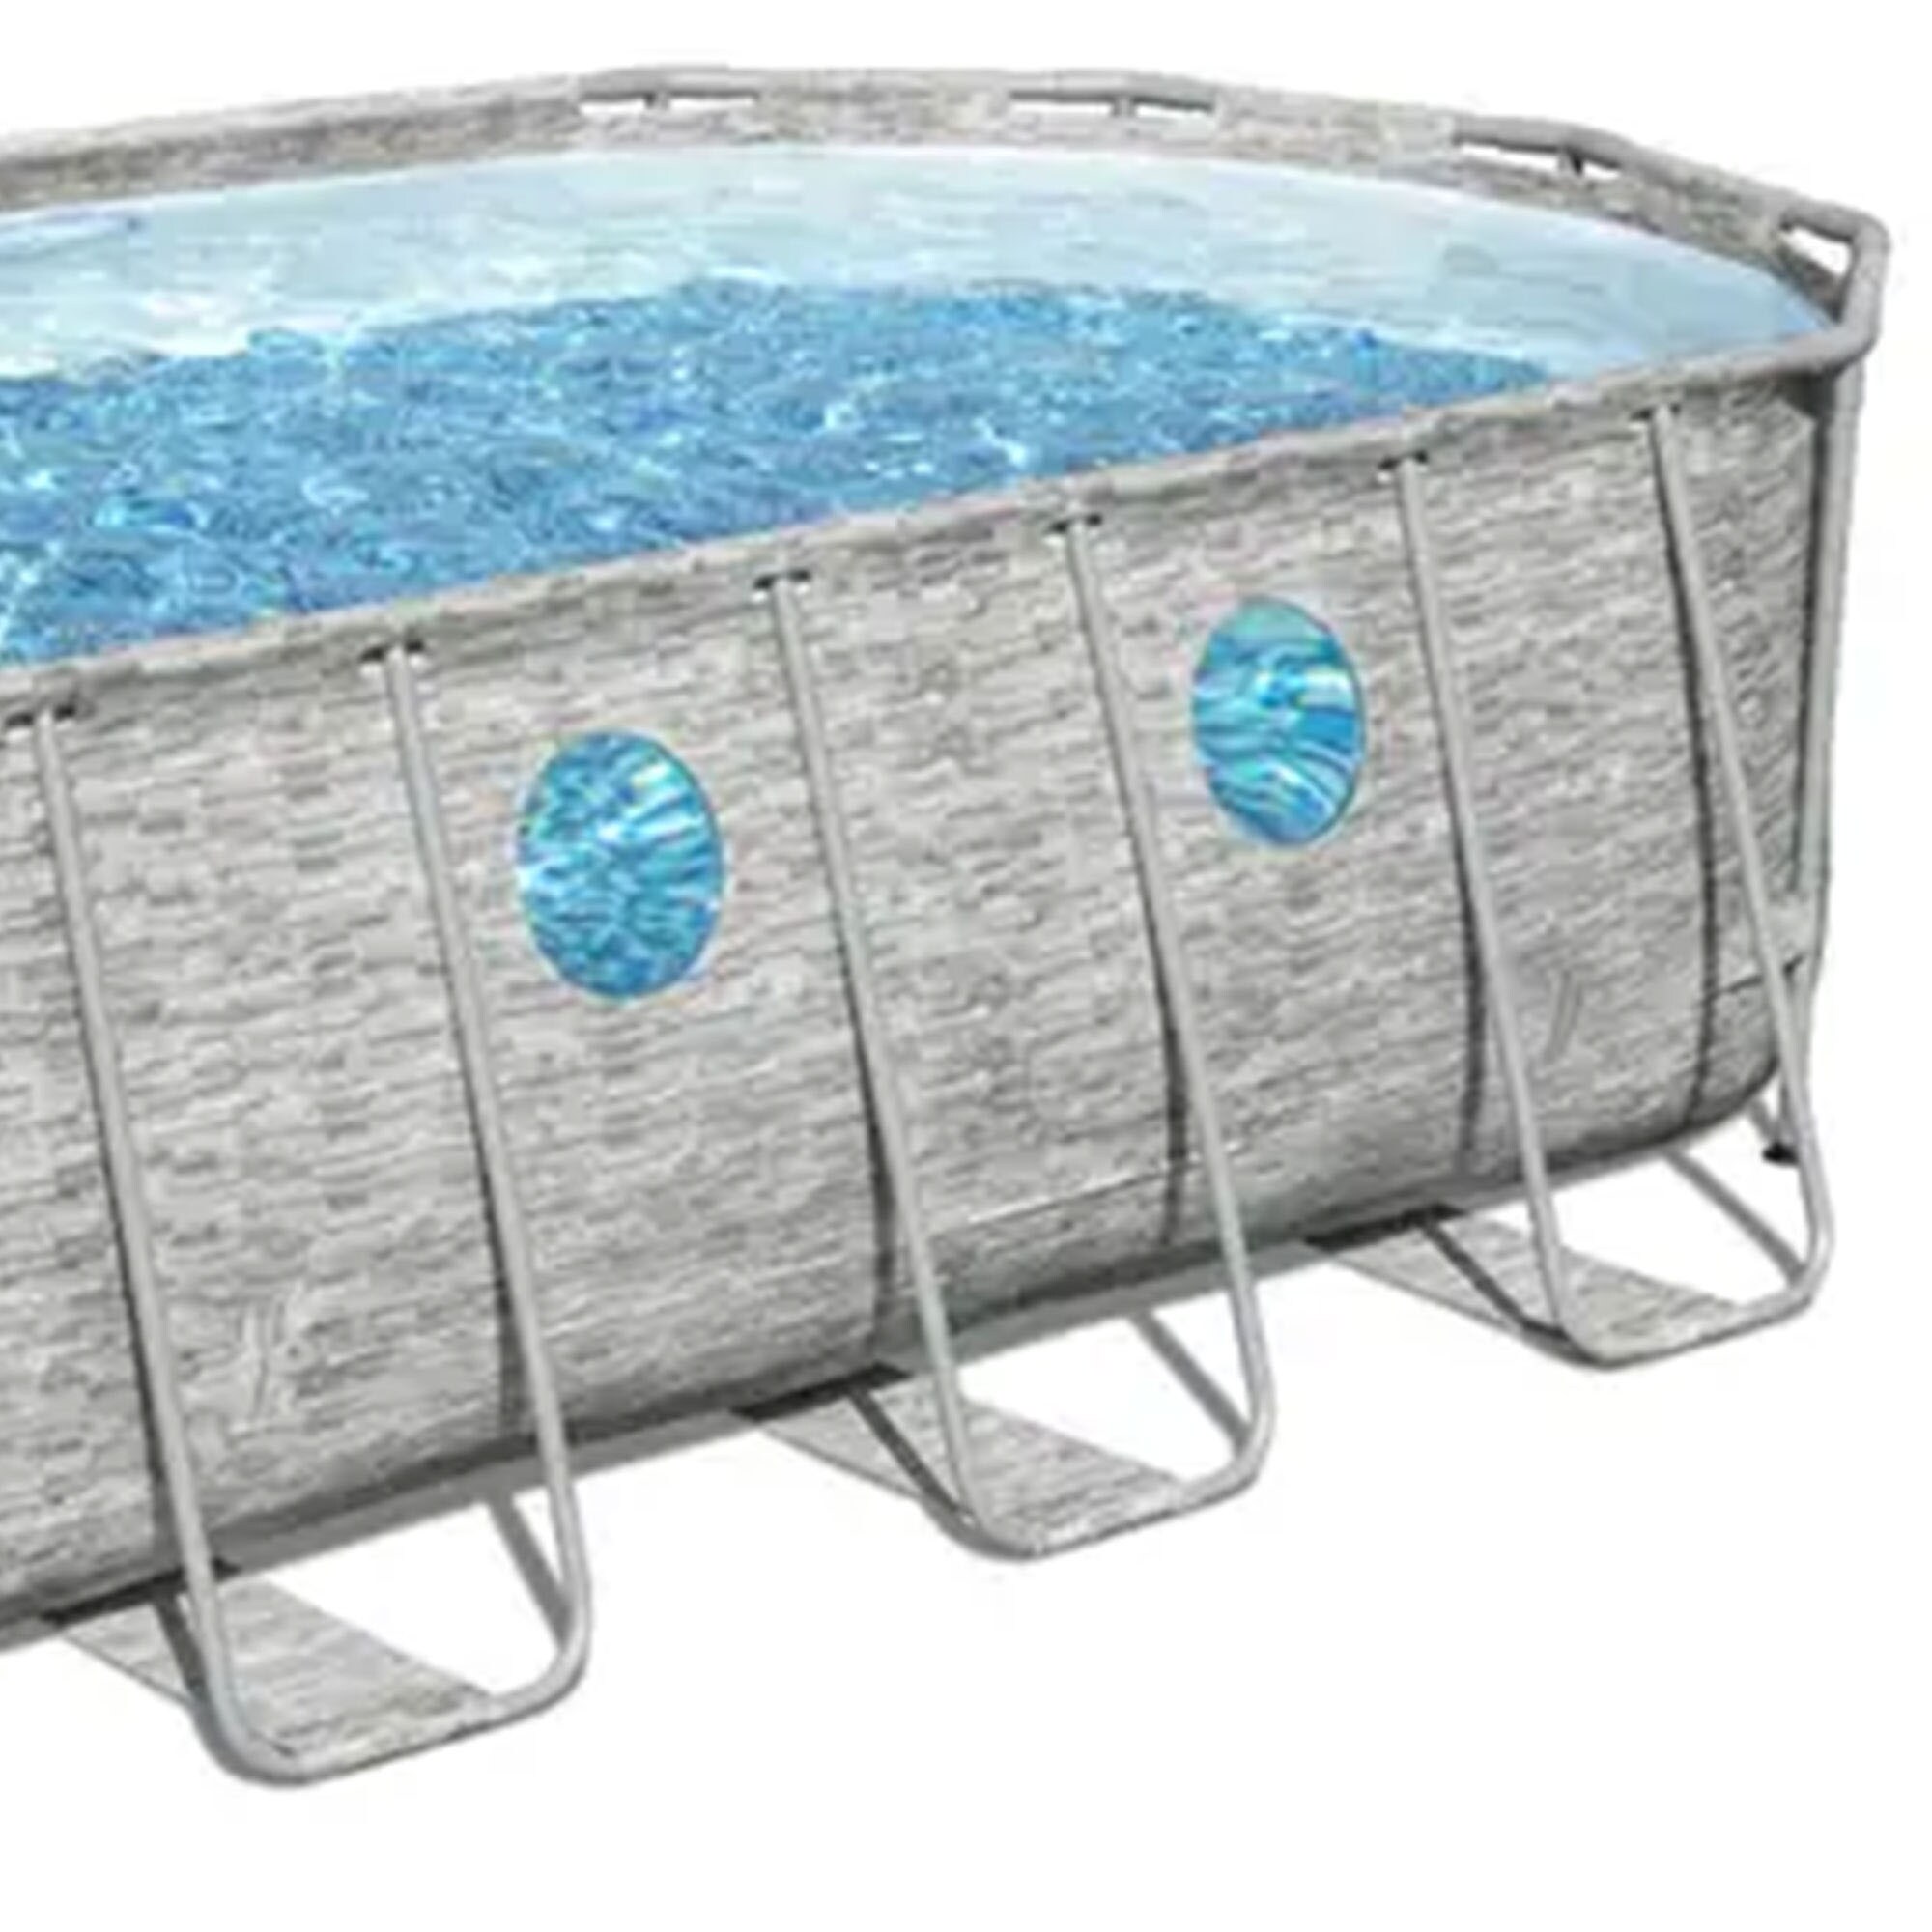 Bestway Power Steel Swim Vista Above-Ground 48-in Wall at x Above-Ground and in x Ladder with department Pump,Pool the Filter Panels 18-ft Steel Oval Cover 9-ft Pool Pools